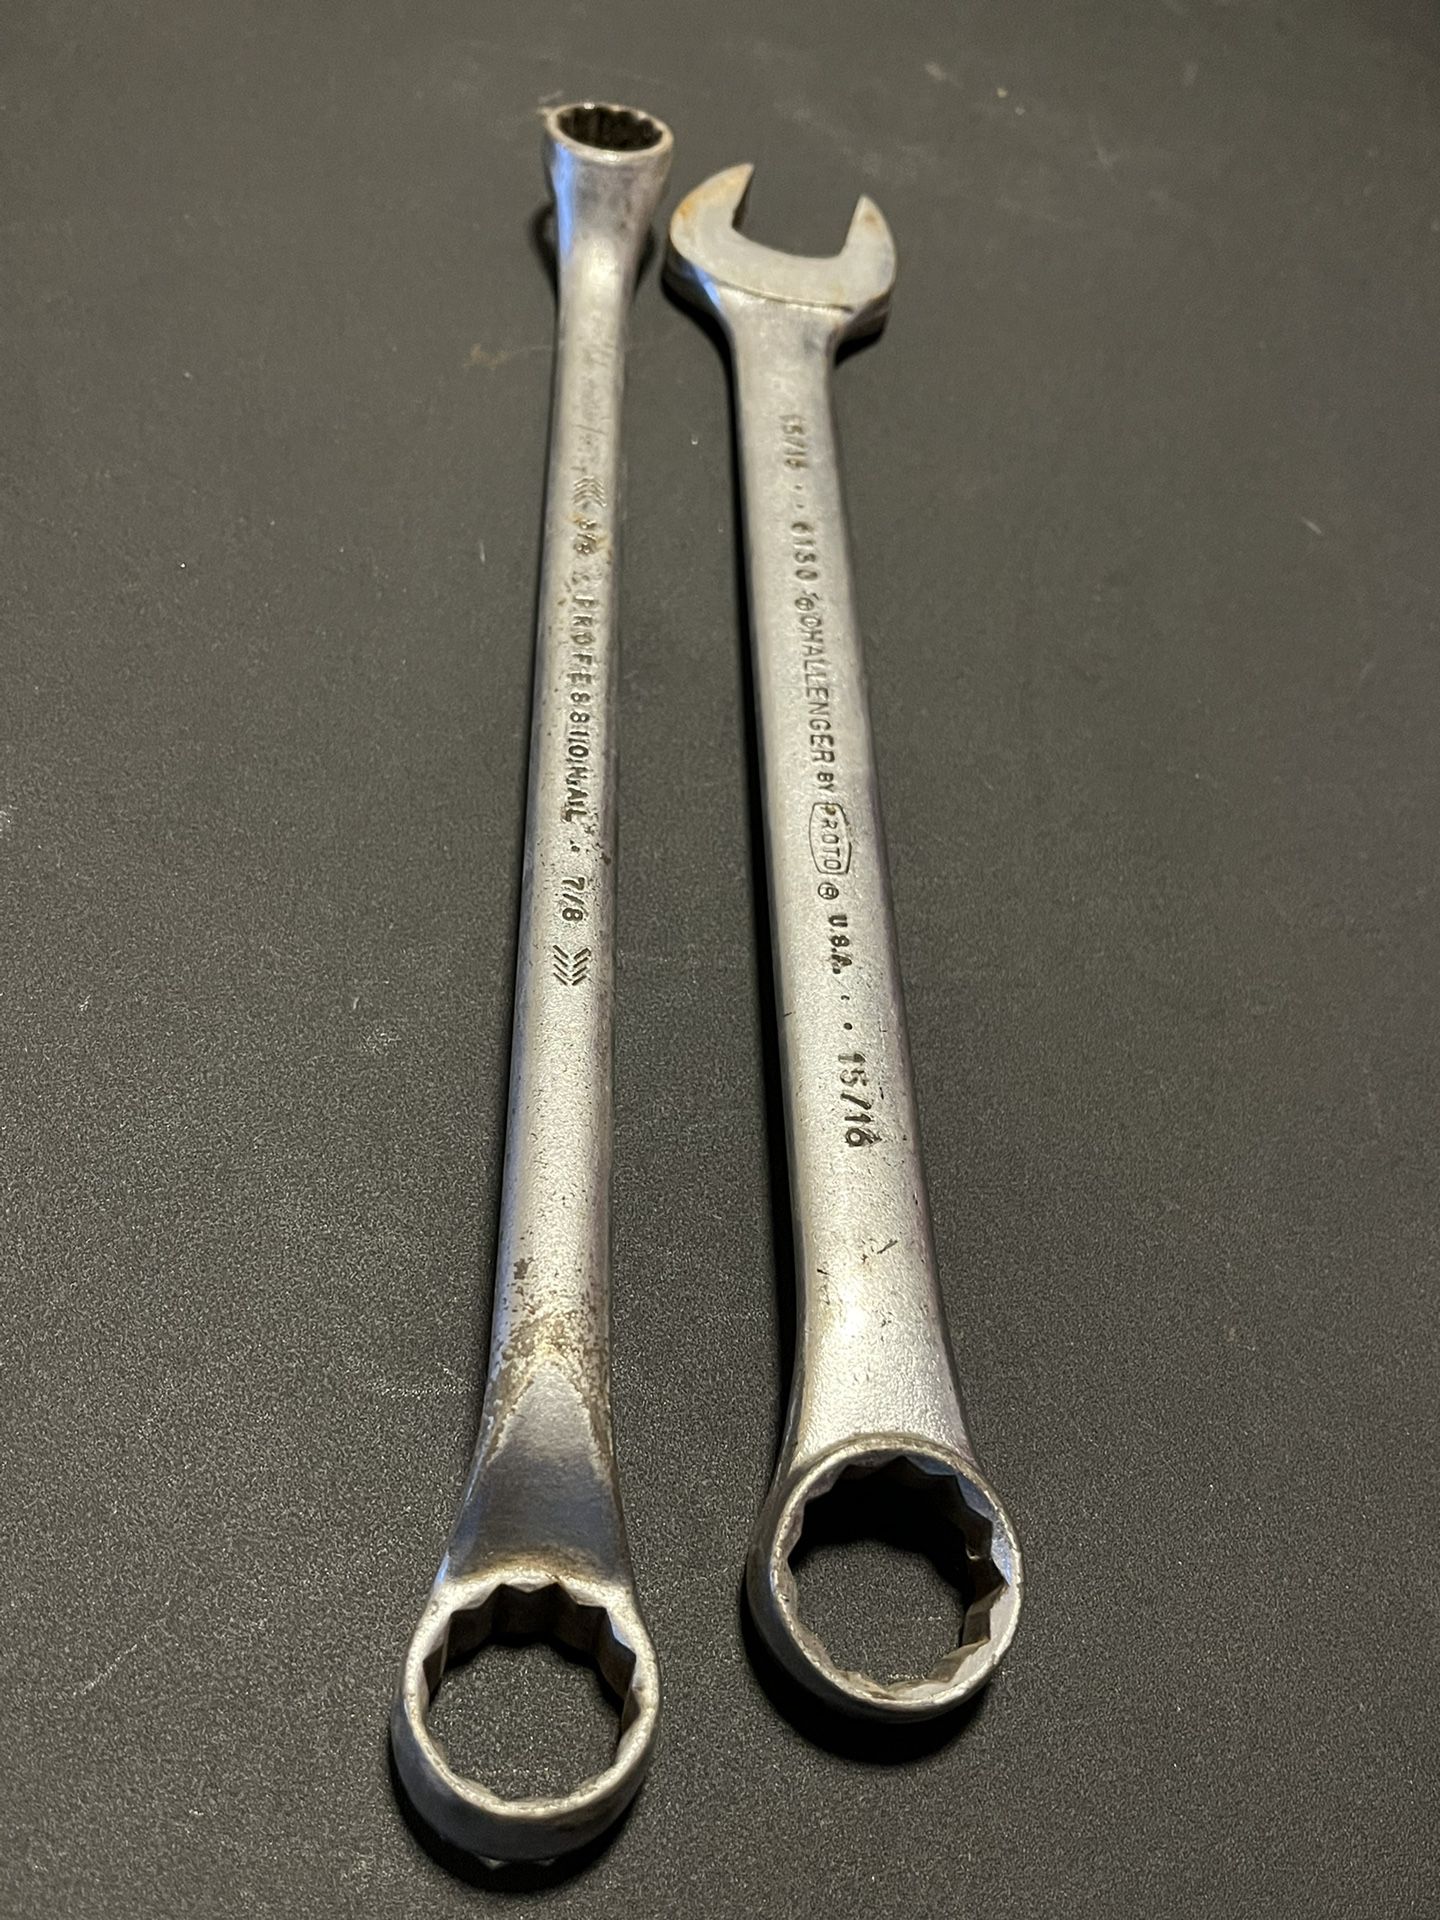 Vintage USA Made Proto 12 Pt. Wrenches $5 Each